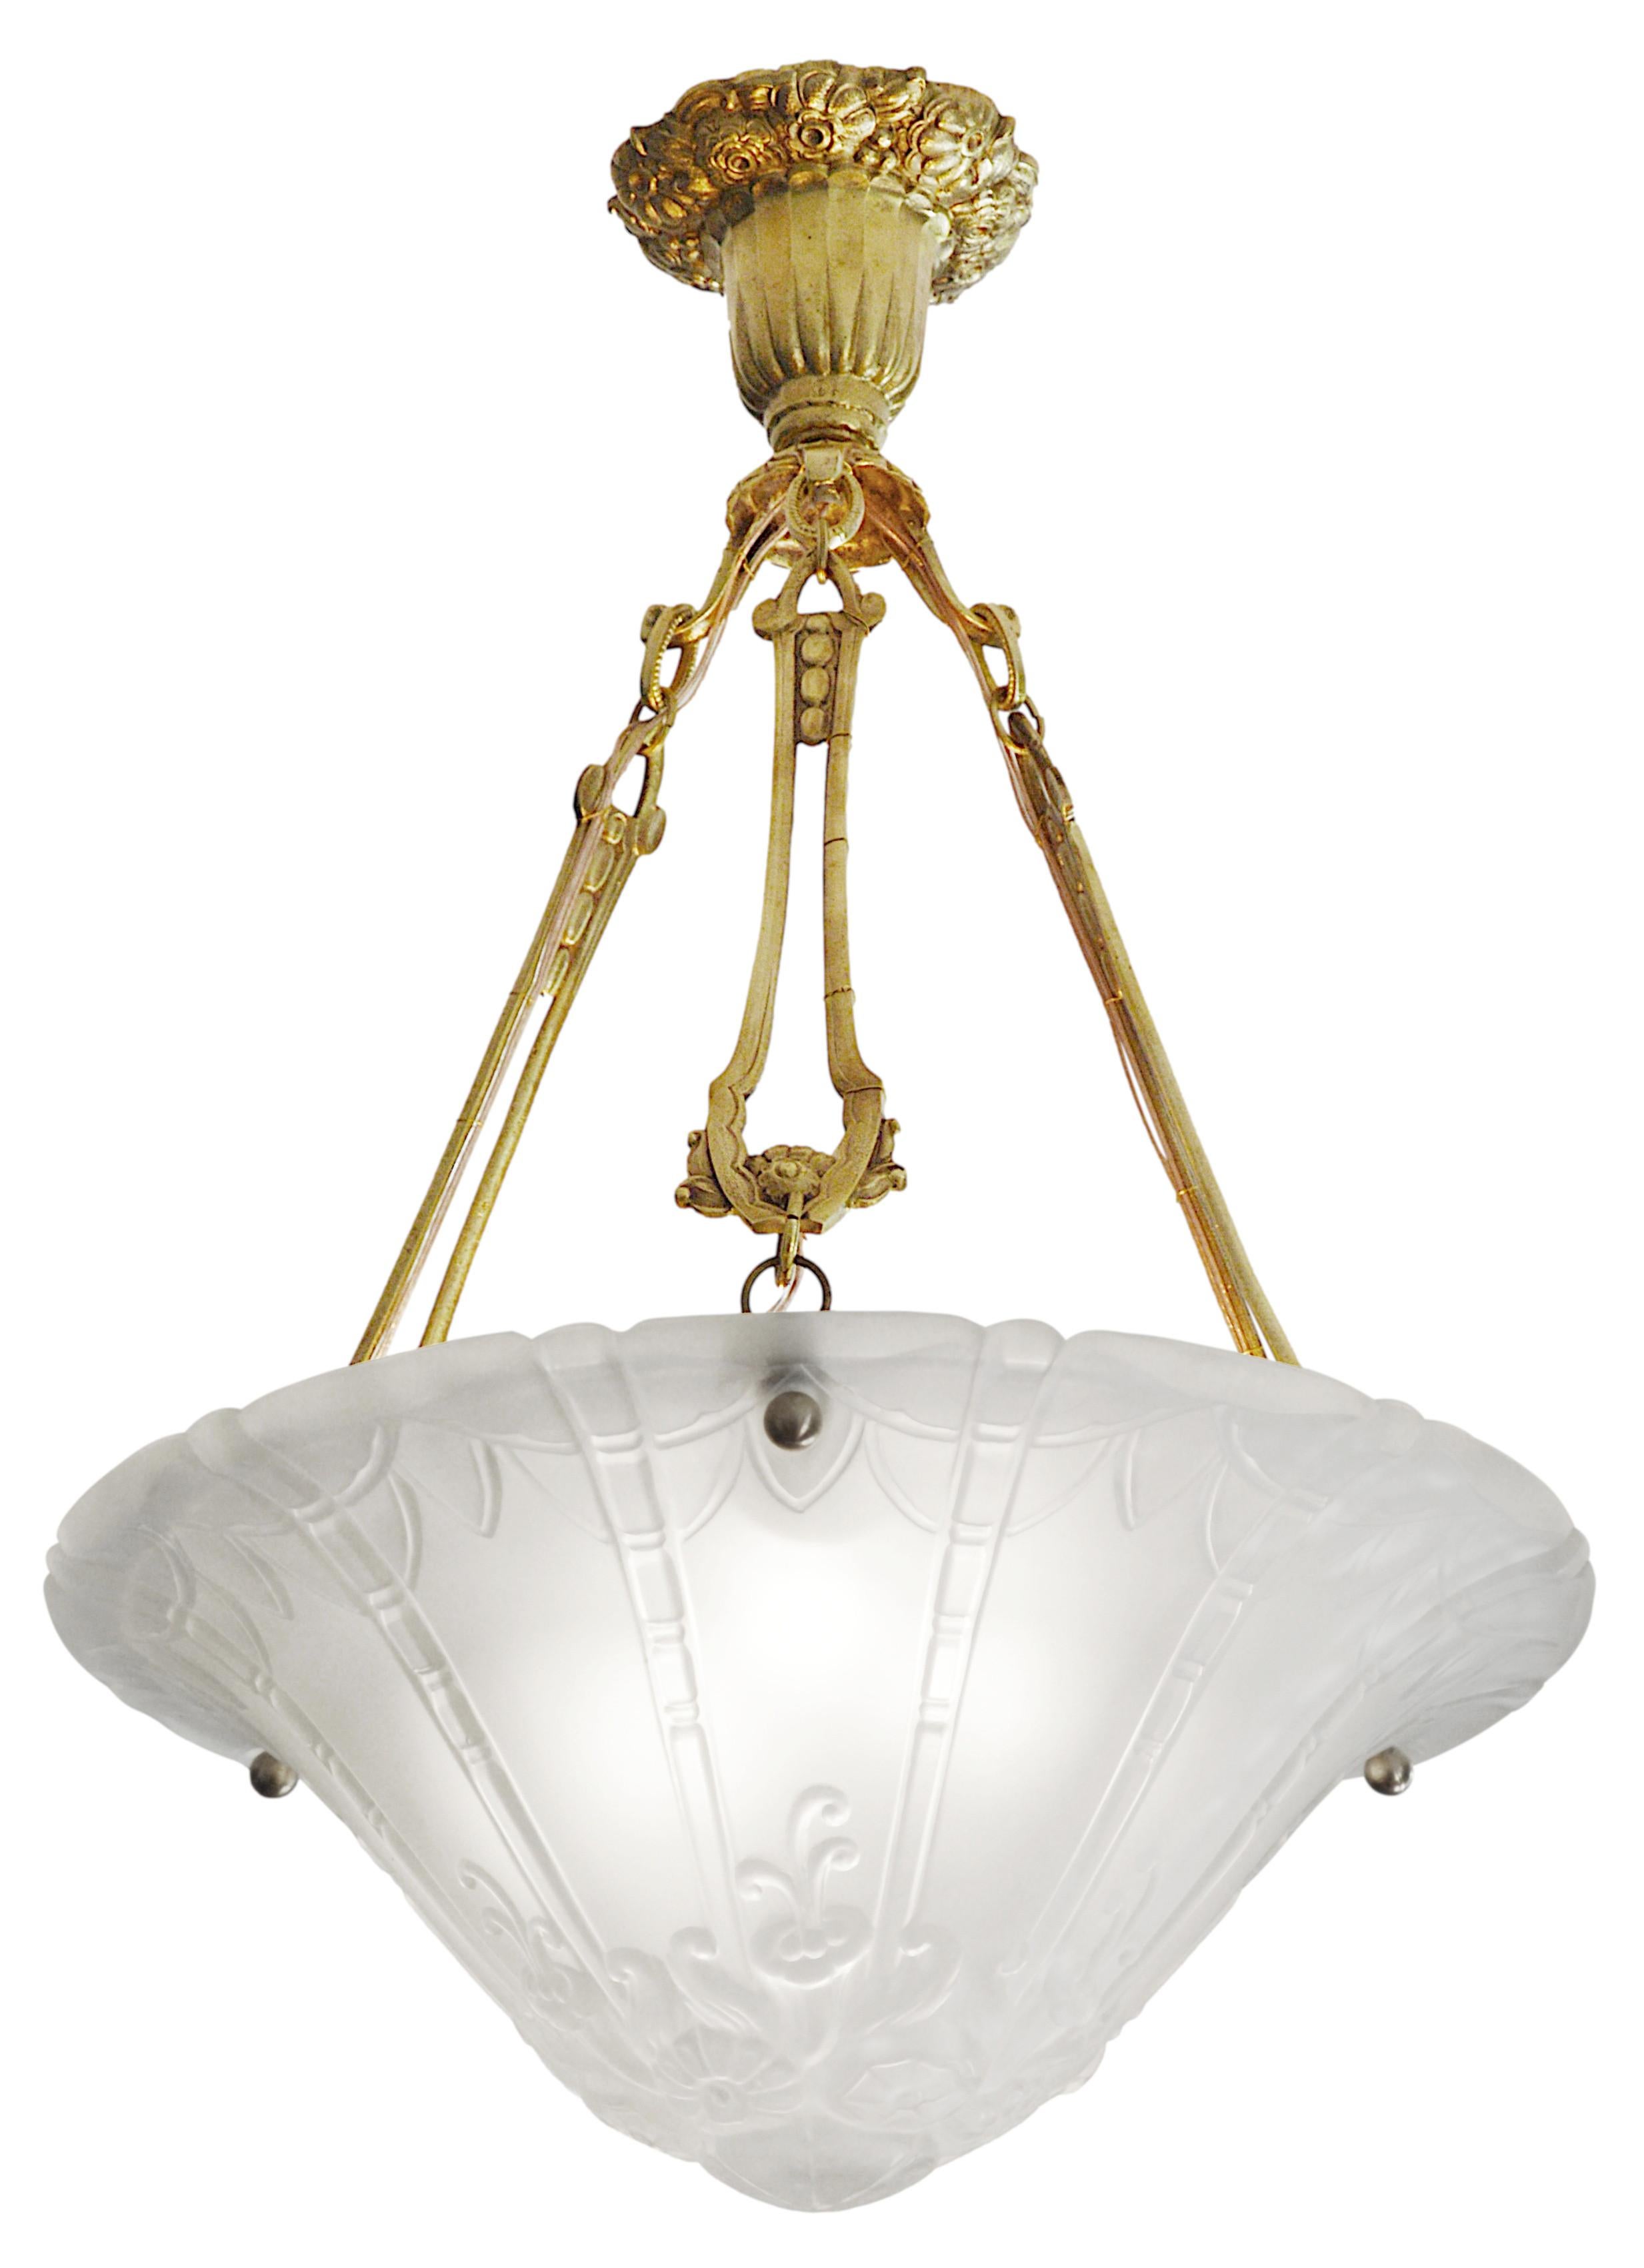 French Art Deco pendant chandelier by Pierre D'AVESN at DAUM'S (Croismare, Nancy), France, early 1930s. Thick molded-pressed satiny glass shade hung at is chiseled solid bronze. Height: 23.2